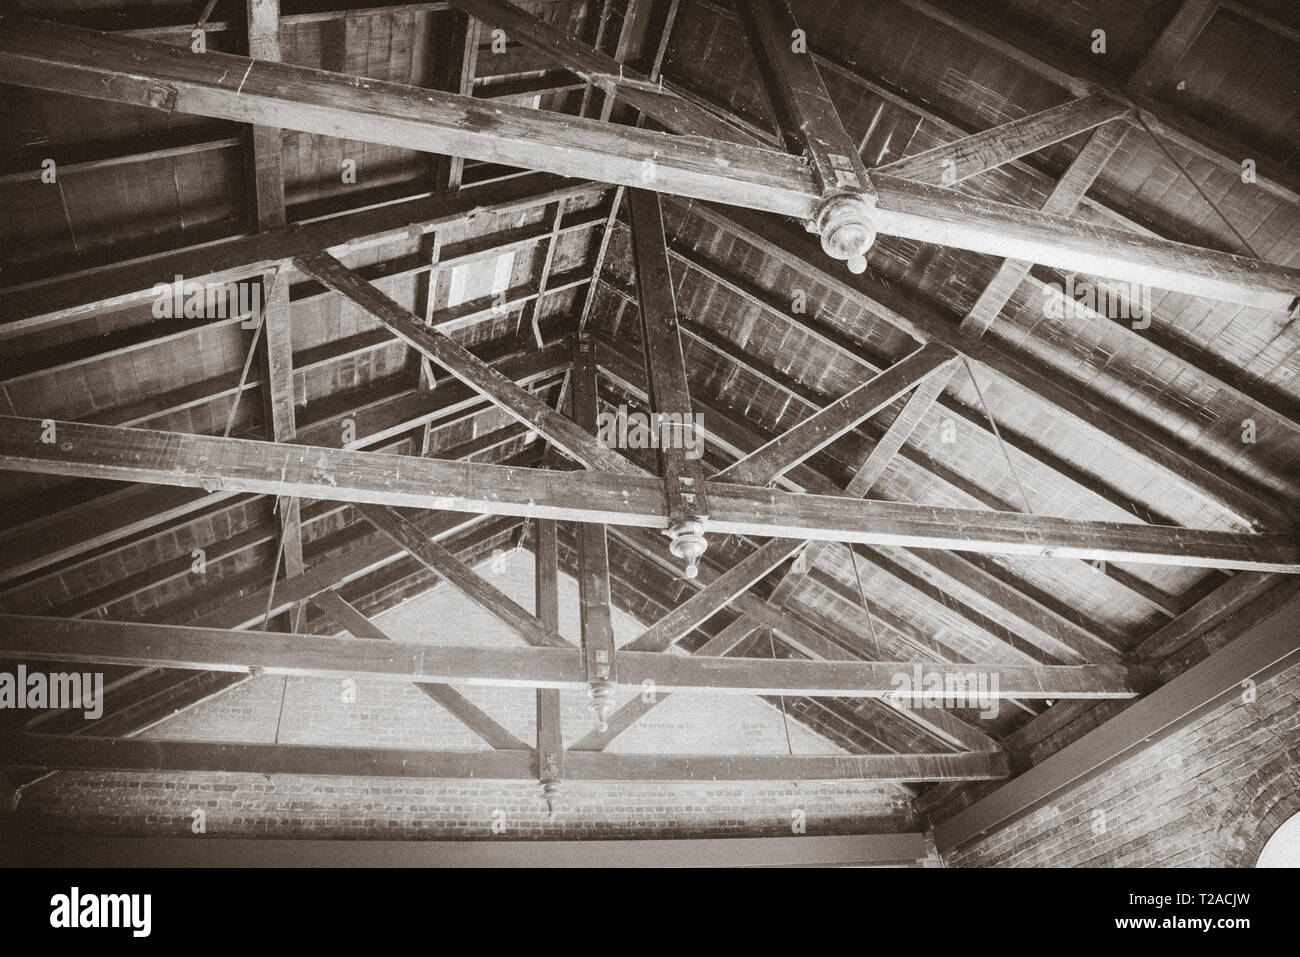 Underside of wooden roof showing support beams, black and white. Stock Photo